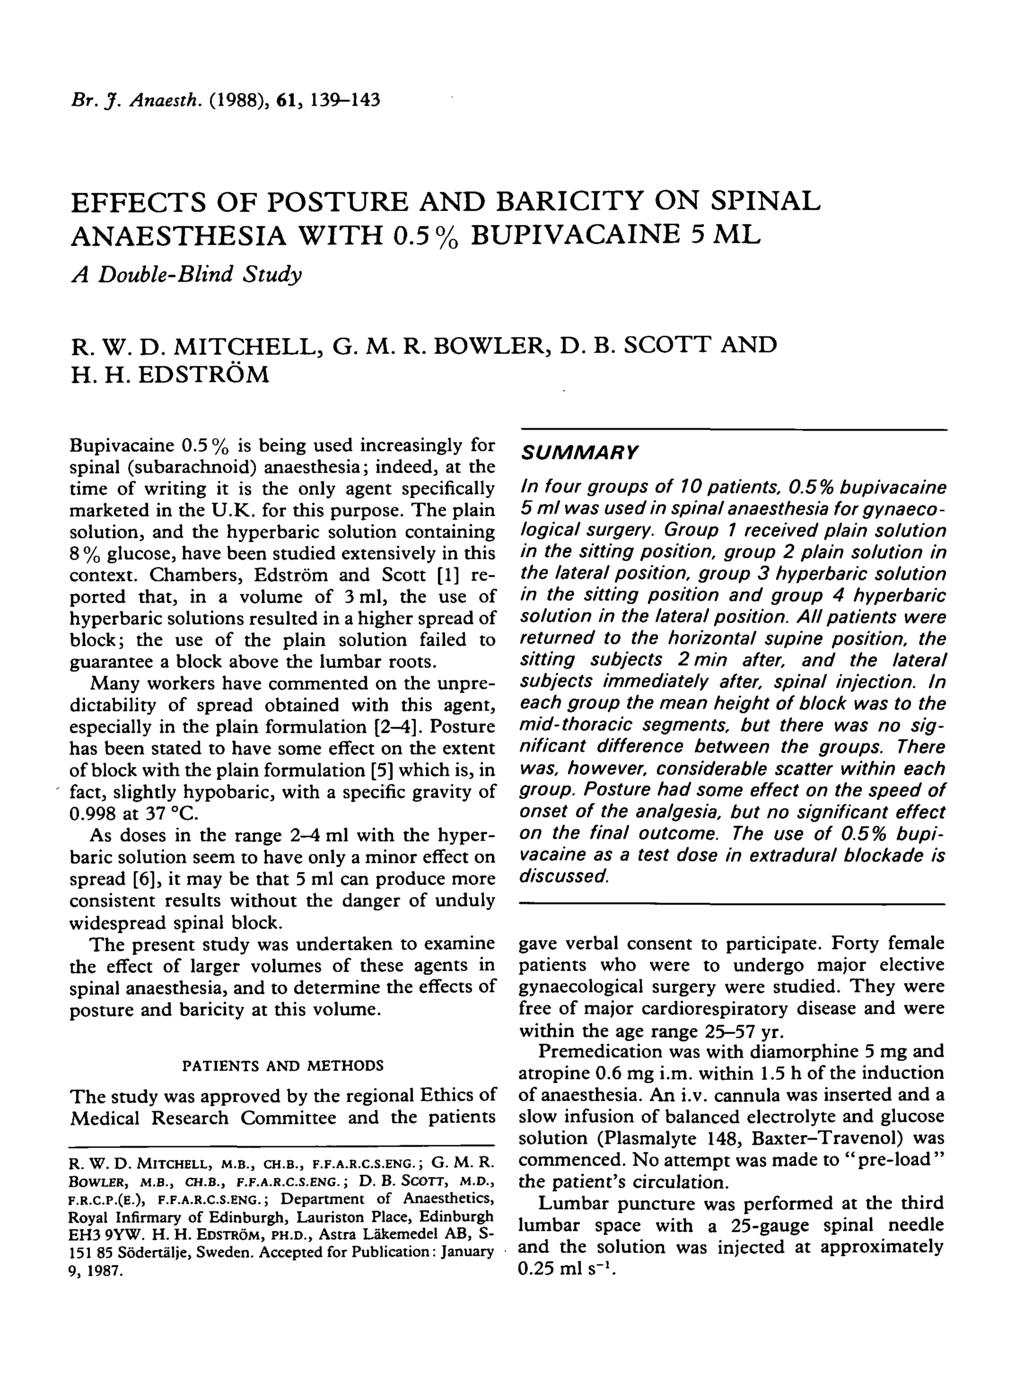 Br.J. Anaesth. (1988), 61, 139-143 EFFECTS OF POSTURE AND BARICITY ON SPINAL ANAESTHESIA WITH 0.5 % BUPIVACAINE 5 ML A Double-Blind Study R. W. D. MITCHELL, G. M. R. BOWLER, D. B. SCOTT AND H.